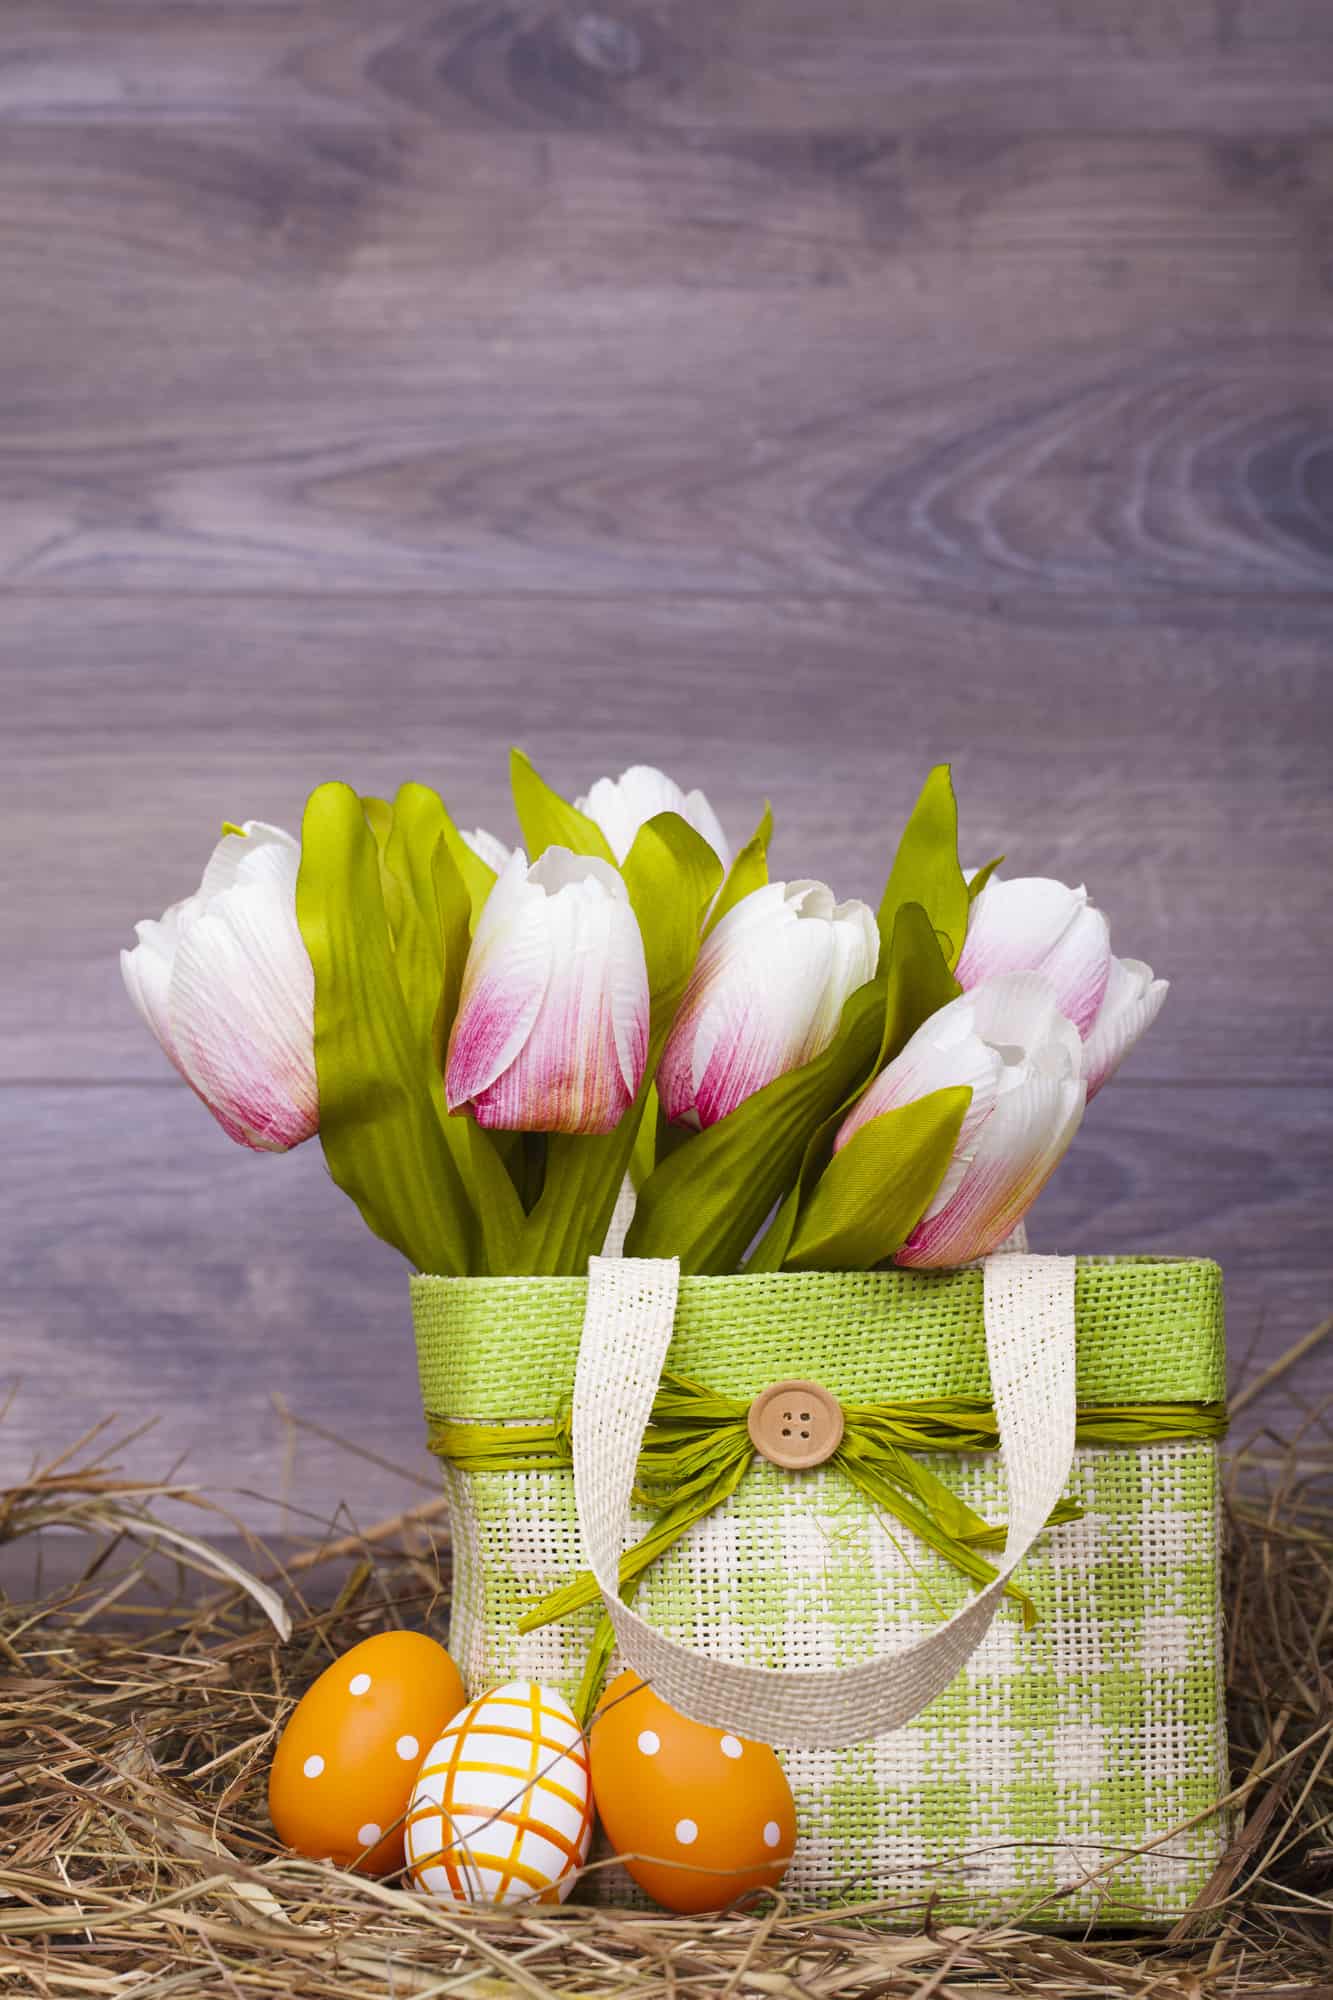 When you shop for Easter flowers and plants at Thrifty Florist, you can ...